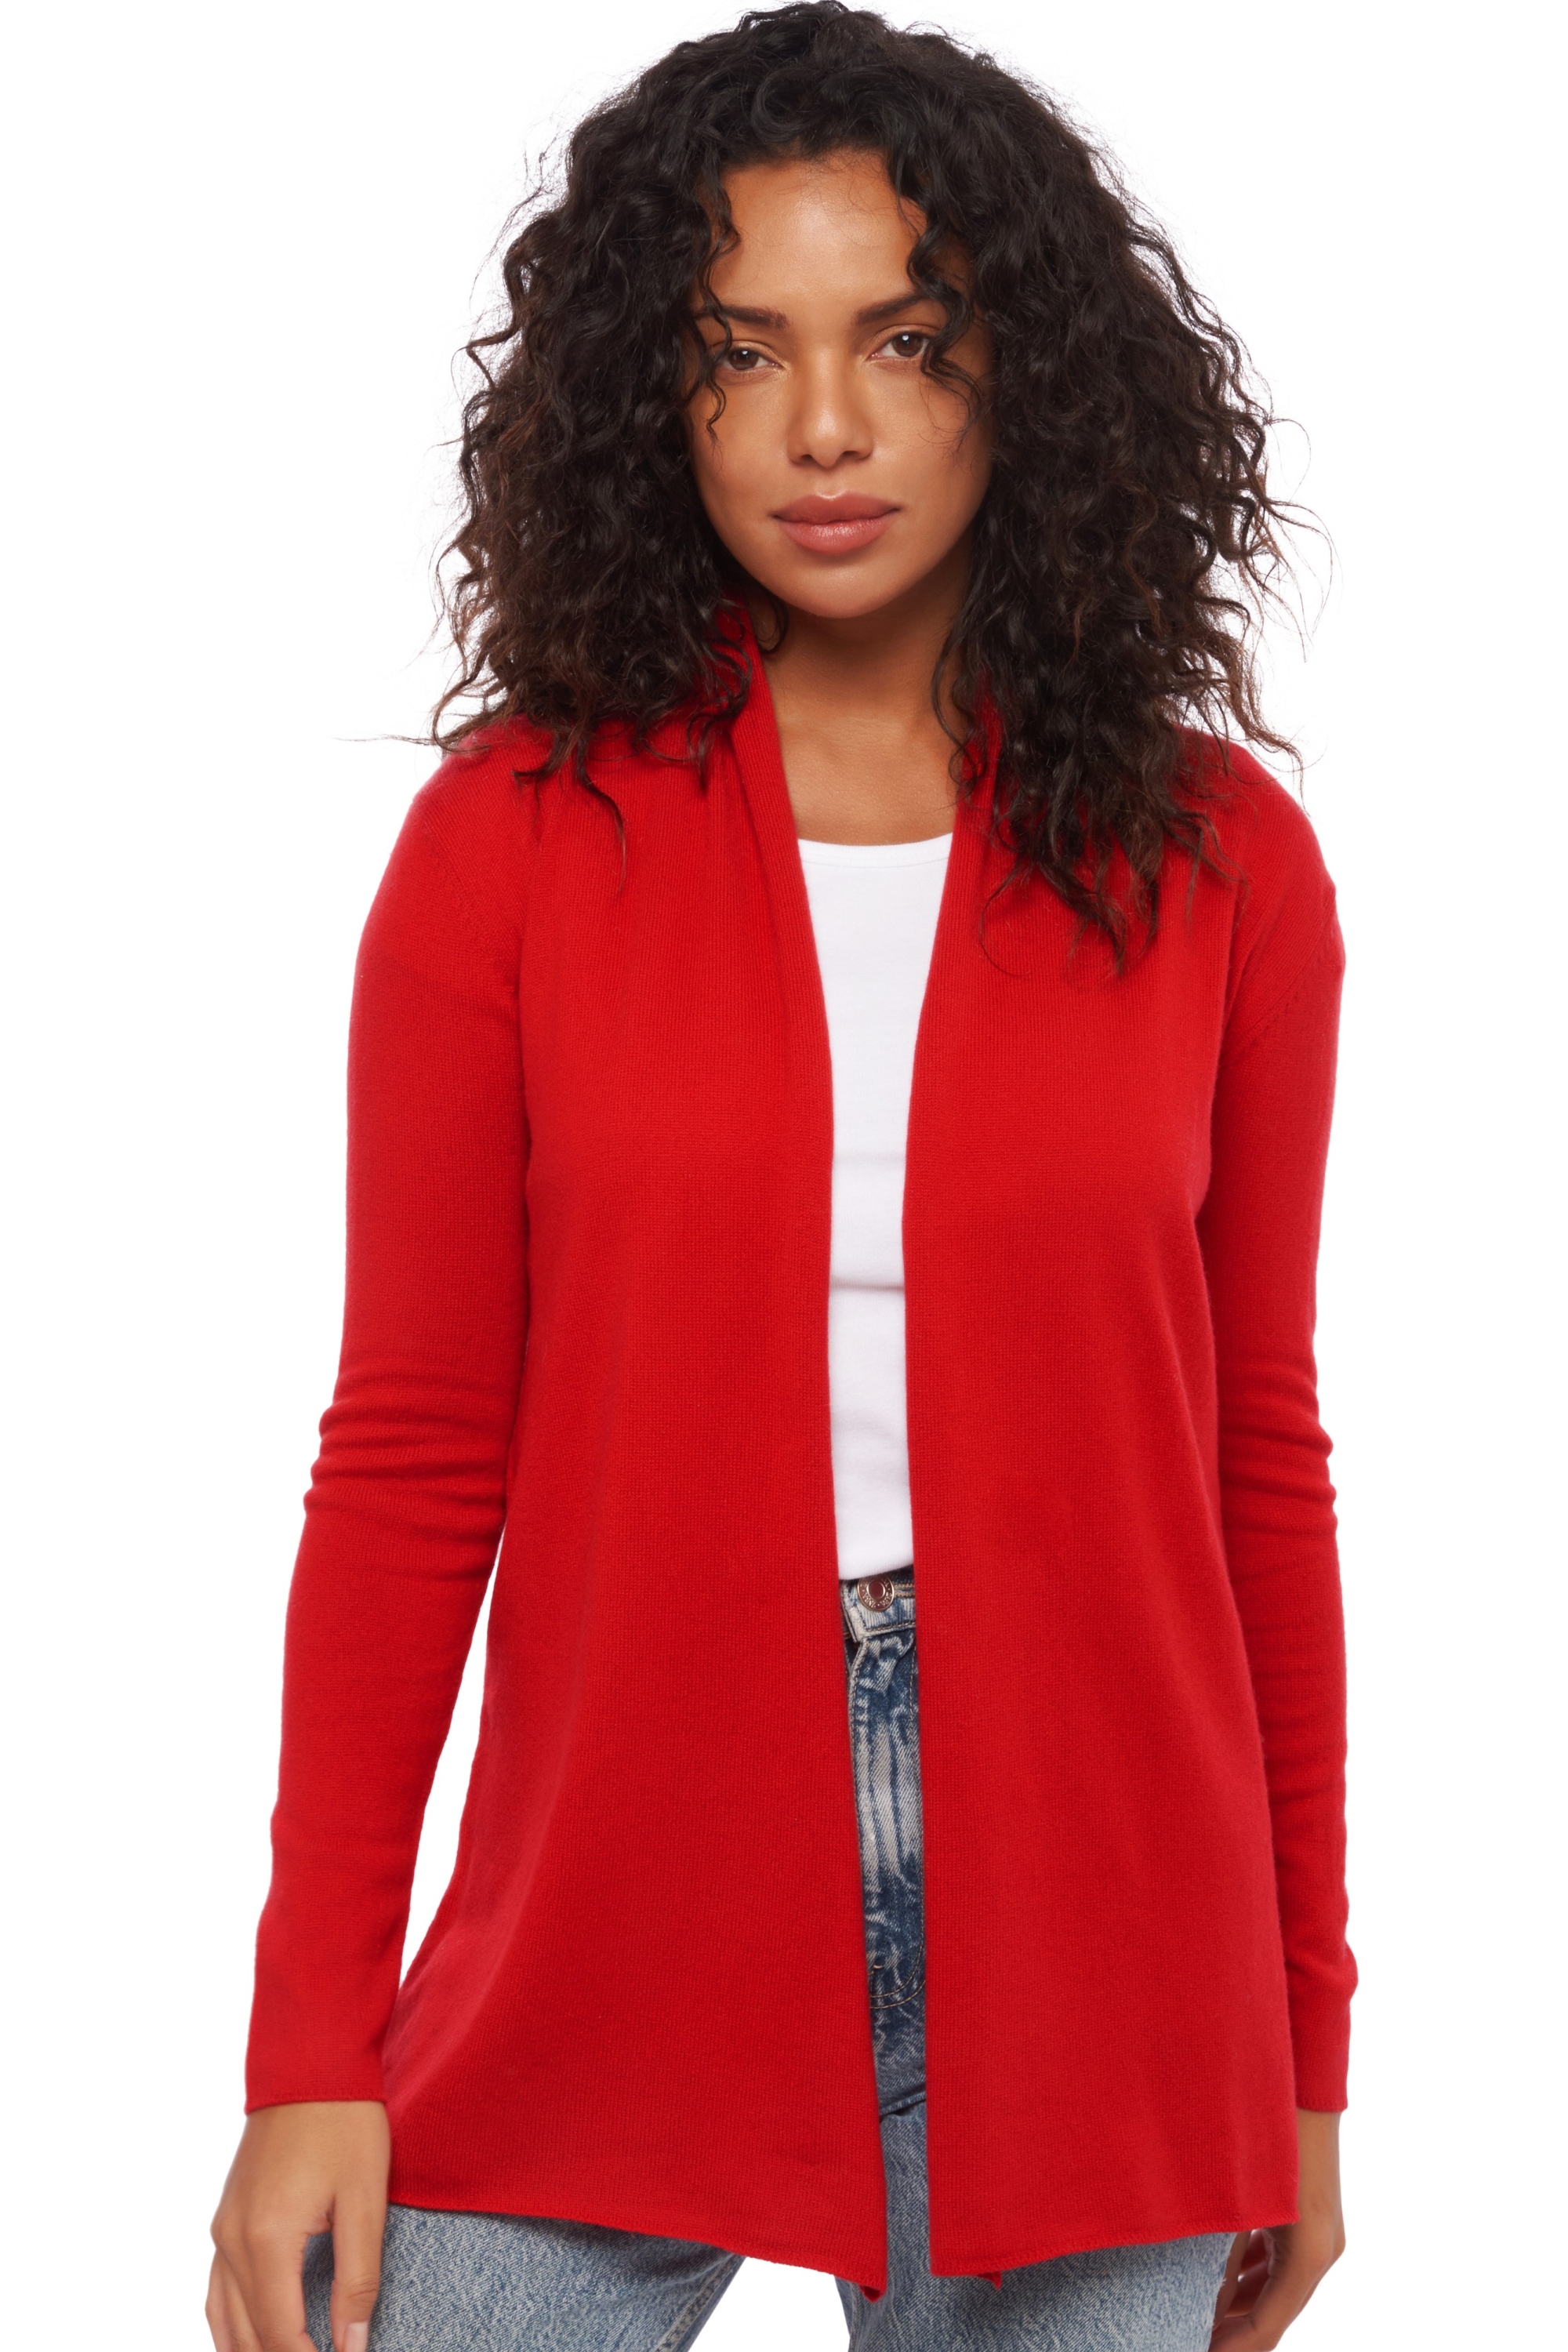 Cachemire pull femme pucci rouge velours xl